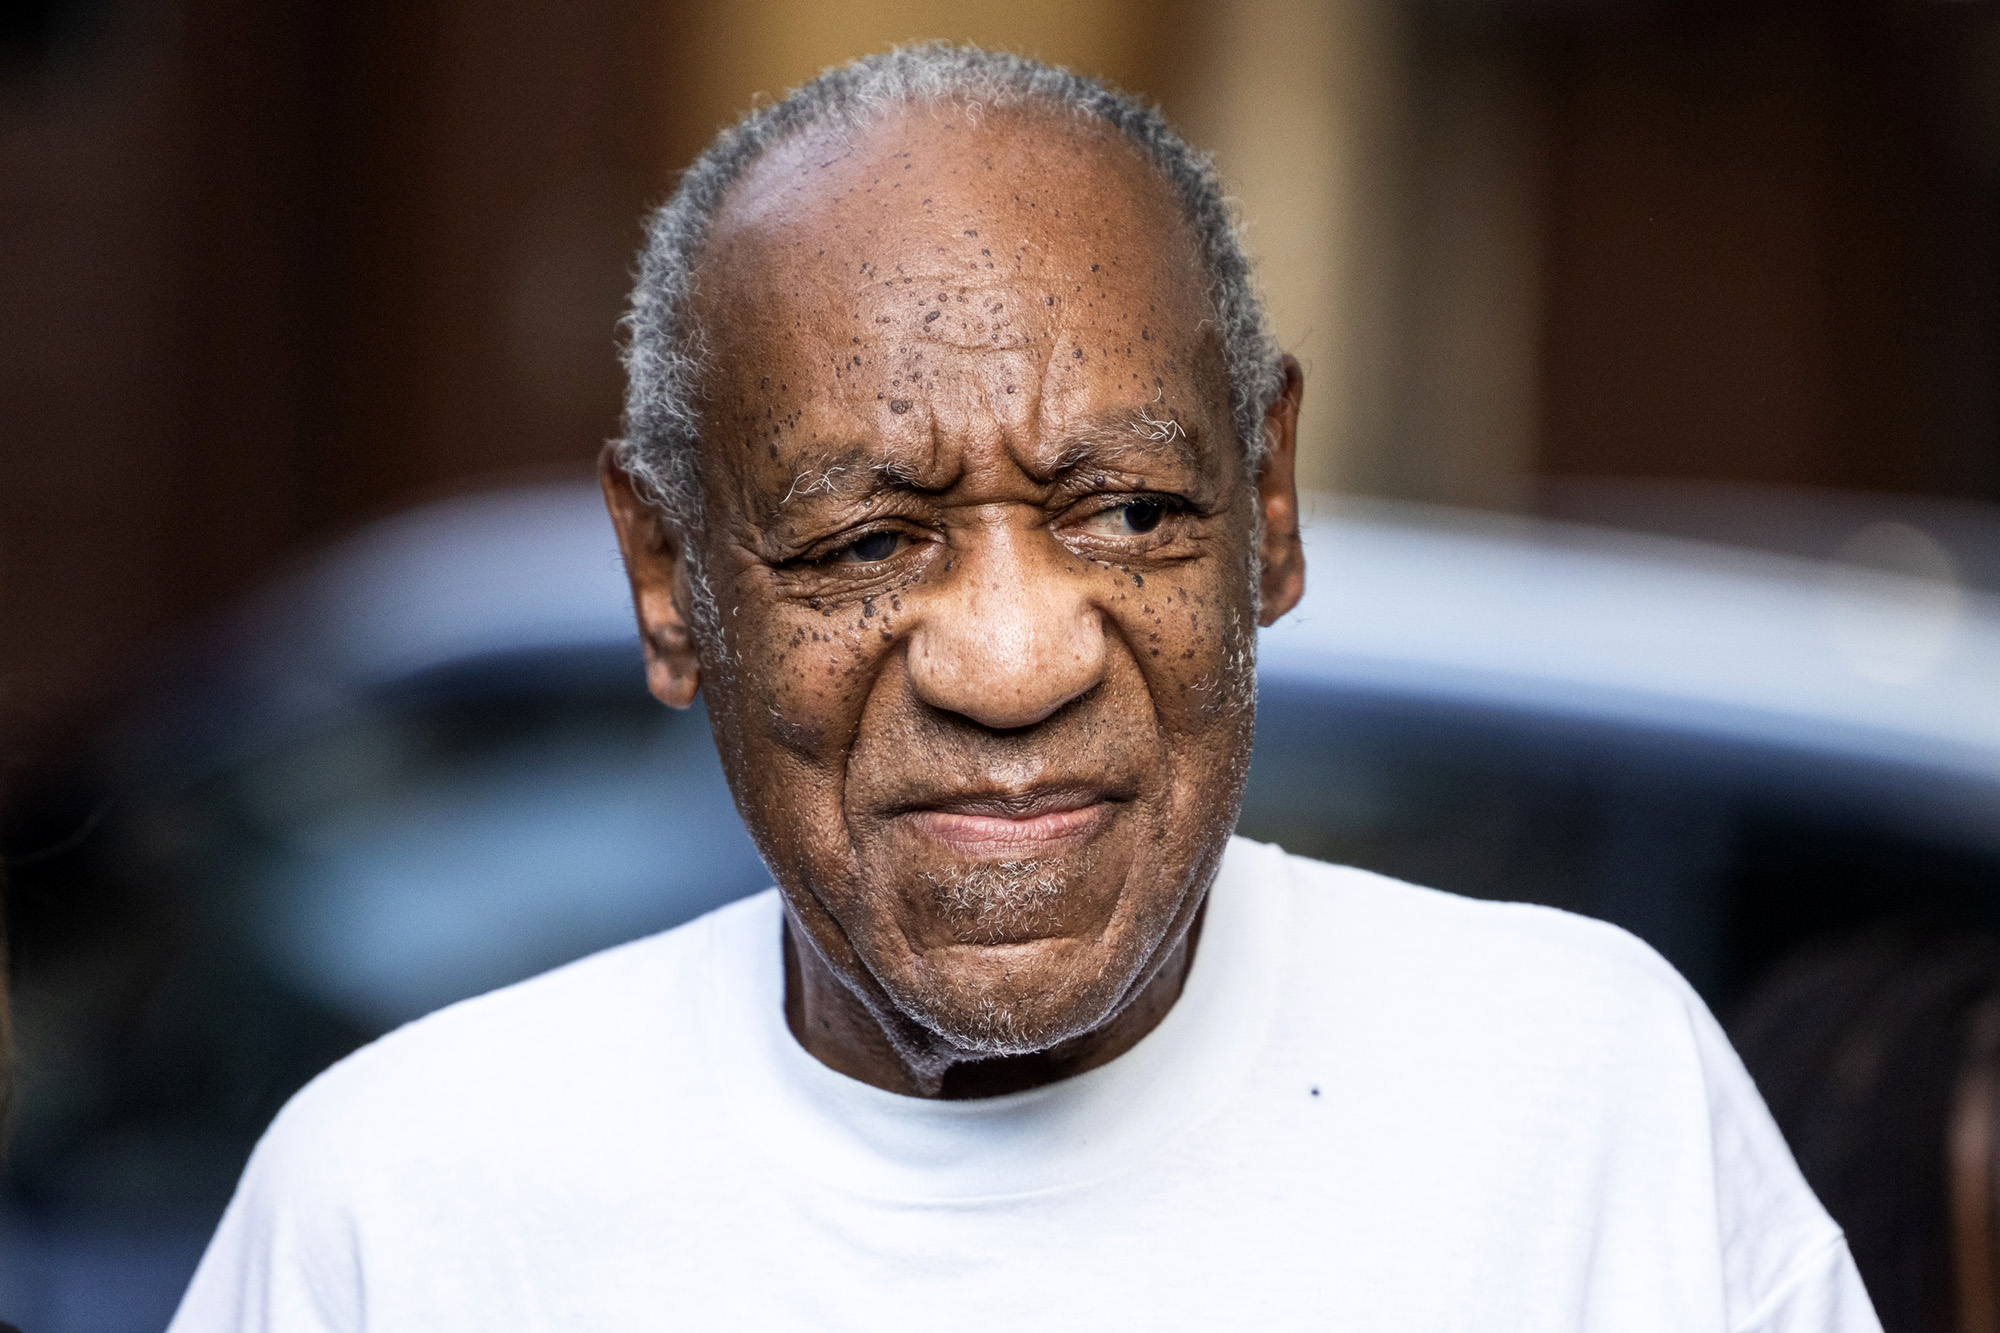 Bill Cosby Net Worth: $400 Million Age: 84 Years image source: nypost  Bill Cosby is a comedian, television performer, and producer from the United States. Bill Cosby's net worth is $400 million as of this writing. "The Cosby Show," which he created and starred in, is his most well-known work. In this post, we will cover Bill Cosby Net Worth along with various aspects of his life.  He was the highest-paid television actor in the world at the time of the show's peak. His base compensation for the show was $1 million every episode, but he earned $4 million per episode after factoring in his producing, creator, syndication, and other income streams. That works out to about $8 million each episode nowadays. He owned 20% of the show's equity, which resulted in hundreds of millions of dollars in syndication royalties over the years, however those earnings have essentially dried up in recent years as a result of his controversies.  In addition to royalties from other programmes and speaking engagement payments, Cosby invested in a highly significant real estate portfolio and art collection. The Cosby art collection and real estate portfolio might be valued more than $250 million at any given time, depending on their individual market valuations.  Bill Cosby’s Early Life  Bill Cosby was born on July 12, 1937, in Philadelphia, Pennsylvania, as William Henry Cosby Jr. His mother worked as a maid, and his father served in the US Navy as a mess steward. Cosby was the class clown as a teenager, but he was also the captain of the track and basketball teams. He also served as class president and performed in plays.  image source: time  After failing the 10th grade, Cosby dropped out and went to work as an apprentice in a shoe repair company. He entered the Navy in 1956 and served as a Hospital Corpsman for four years while earning his high school equivalency credential through correspondence classes.  In 1961, Cosby received a track and field scholarship at Temple University, where he studied physical education and ran track while also playing fullback for the football team.  Cosby continued to hone his sense of humor as he moved through his studies at Temple; he laughed with fellow enlistees in the military and subsequently with college pals. He became more aware of his capacity to make people laugh when he began bartending at a Philadelphia club to gain money, and he would entertain his customers with humor.  Bill Cosby’s Personal Life  Since 1964, Cosby has been married to Camille, with whom he has five children.  image source: hollywoodreporter  Ennis, their 27-year-old son, was killed in an attempted robbery while repairing a flat tyre on the side of the interstate in January 1997. Ensa, their daughter, died of renal illness in February 2018 while awaiting a kidney transplant. Cosby's lawyers revealed in 2016 that he is now legally blind.  Bill Cosby Comedy Career  In 1961, Cosby launched his stand-up performance in Philadelphia bars and later at The Gaslight Cafe in New York City. He then went on to do stand-up comedy in Chicago, Las Vegas, San Francisco, and Washington, DC.  His nationwide exposure on The Tonight Show in 1963 led to a run of popular comedy albums in the 1960s. Bill Cosby Is a Very Funny Fellow...Right!, his debut album, was released in 1964. Between 1965 and 1987, Cosby received seven Grammy Awards for Best Comedy Performance.  On Spin magazine's list of the 40 Greatest Comedy Albums of All Time, his album To Russell, My Brother, Whom I Slept With was named number one. Cosby created a reputation for himself by retelling amusing childhood stories. His stand-up breakthrough led to parts on The Dick Van Dyke Show and the action series I Spy, for which he won three Emmy Awards in a row.  The Cosby Show image source: britannica  The Cosby Show, one of the most popular comedies of all time, was created by Cosby in the 1980s. Cosby co-wrote, co-produced, and starred in the show, and he had a lot of creative influence over it. He was involved in every area of The Cosby Show's production.  The plots were frequently based on Bill's own family life, and the parallels didn't end there: Parents of five children, the main protagonists Cliff and Clair Huxtable, like Cosby and his real-life wife, were college-educated and financially wealthy. The show aired from September 1984 to September 1992, and it is one of only two sitcoms to have topped the Nielsen ratings for five seasons in a row.  Bill Cosby’s Sexual Assault Controversy  Since 2000, Bill Cosby has been accused of rape, sexual assault, child sexual abuse, and sexual battery by a large number of women. According to his accusers, the first assaults occurred in the mid-1960s. Cosby has frequently rejected the charges, claiming that the encounters were mutually agreed upon. The majority of the acts stated by his accusers were not covered by legal statutes of limitations.  image source: washingtonpost  Following the claims, practically everyone associated with the Bill Cosby brand cut connections with him. The Cosby Show reruns and other programmes starring Bill were withdrawn from the airwaves. In 2015, Cosby was the subject of eight legal lawsuits, which grew to 33 by the end of the year.  Bill Cosby was convicted guilty of three counts of aggravated sexual assault by a jury in Pennsylvania on April 26, 2018. He was sentenced to three to ten years in state prison in September 2018. In January 2019, he was moved from administrative segregation to the general population at SCI Phoenix in Pennsylvania, where he had been confined to a single cell in administrative segregation. Cosby's appeal to have his conviction overturned was denied in December 2019.  Real Estate image source: radaronline  Bill's real estate holdings are valued at more than $100 million. He has substantial real estate in both Pennsylvania and Beverly Hills. Based on comparable recent transactions, his Beverly Hills mansion alone could be worth $60 million. It could be closer to $80 million.  5 Unknown Facts about Bill Cosby Cosby worked as a Hospital Corpsman in physical therapy with Navy and Marine Corps servicemen injured during the Korean War during his four years in the Navy. Bill Cosby: Himself, a concert film he released in 1983, is widely regarded as "the finest comedic concert film ever." On May 2, 2015, Cosby's final show of the "Far From Finished" tour took place at the Cobb Energy Performing Arts Centre in Atlanta, Georgia. On January 25, 1964, Cosby married Camille Olivia Hanks. Erika, Erinn, Ensa, Evin, and Ennis are the couple's five children. Cosby became legally blind in 2016, according to reports. Famous Quotes by Bill Cosby  In this post of Bill Cosby Net Worth, here are some of his famous quotes that you need to see-  “Every closed eye is not sleeping, and every open eye is not seeing.” - Bill Cosby  “Always end the name of your child with a vowel, so that when you yell the name will carry.” - Bill Cosby  “The past is a ghost, the future a dream, and all we ever have is now.” - Bill Cosby  “The truth is that parents are not really interested in justice. They just want quiet.” - Bill Cosby  “Fatherhood is pretending the present you love most is soap-on-a-rope.” - Bill Cosby  “I don’t know the key to success, but the key to failure is trying to please everybody.” - Bill Cosby  “A word to the wise isn’t necessary, it is the stupid ones who need all the advice.” - Bill Cosby  “In order to succeed, your desire for success should be greater than your fear of failure.” - Bill Cosby  Bill Cosby had a long and glorious career as a comedian and actor. His activities over the course of his career, however, have now caught up with him. Cosby was found guilty of sexual assault and will serve time in jail. We hope you liked this article on Bill Cosby Net Worth. Let us know your thoughts about his conviction in the comment section below.  Also checkout: Billie Eilish Net Worth: Early Life, Career, Lifestyle Quotes